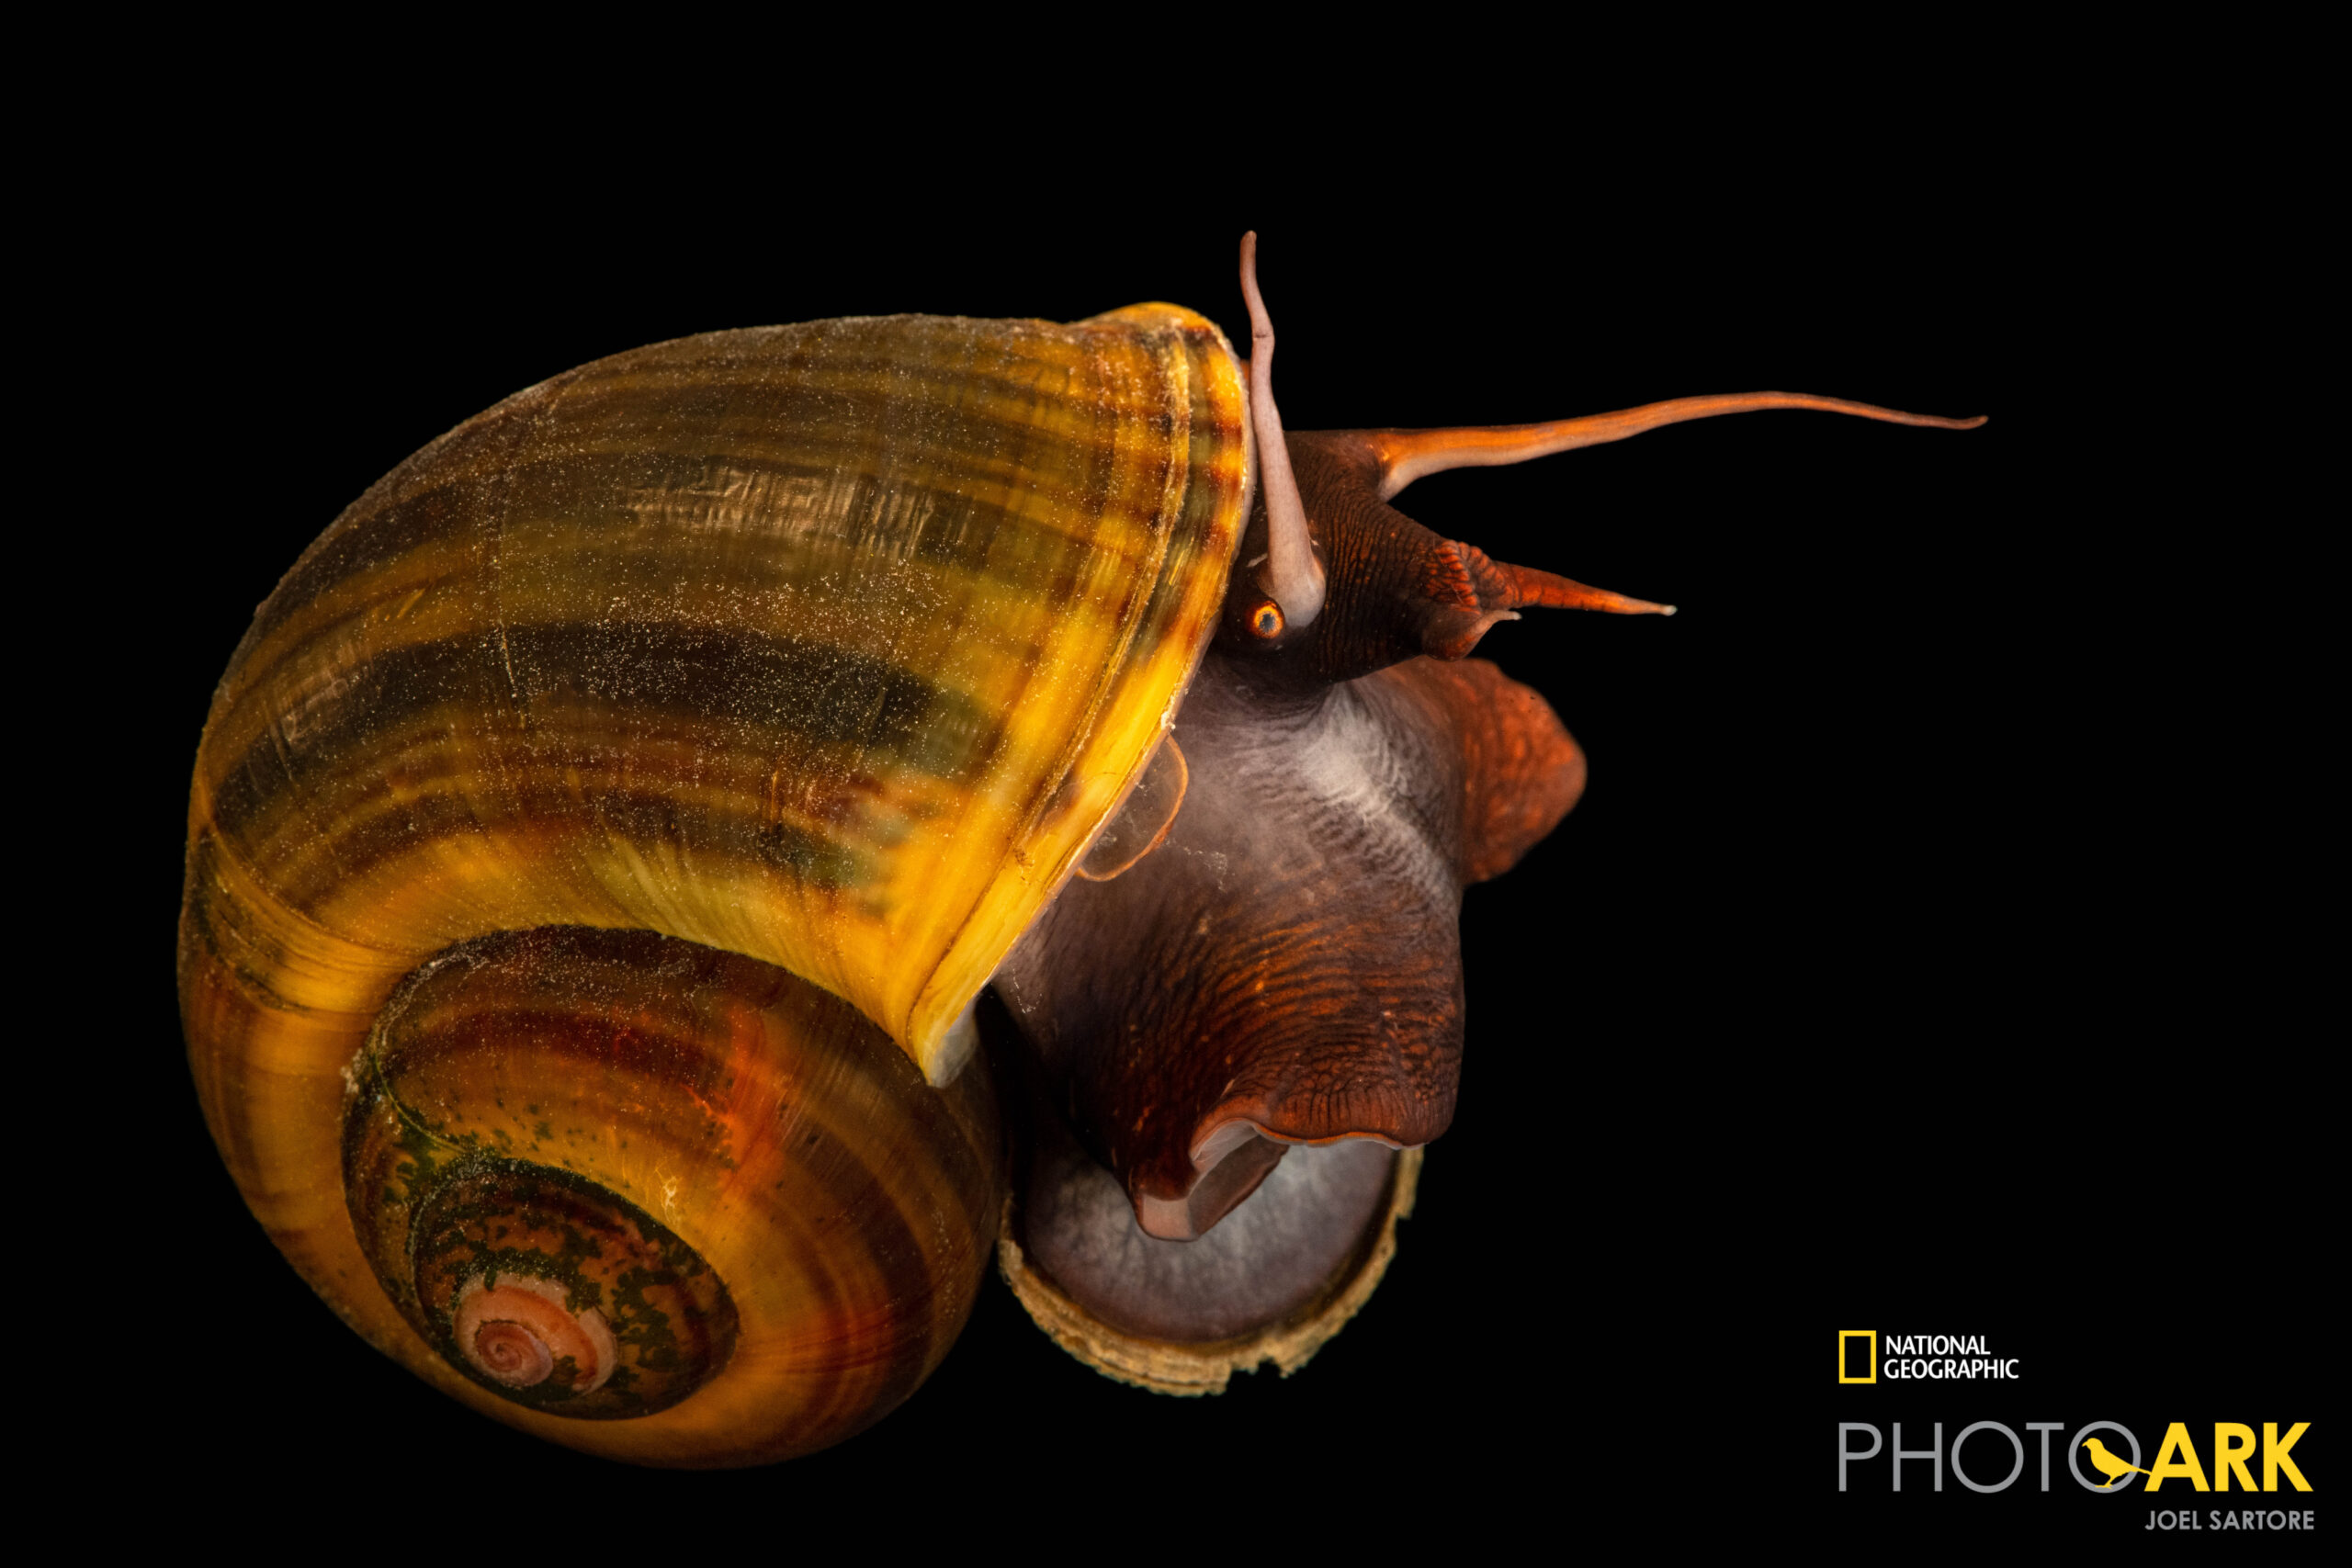 A Florida applesnail (Pomacea paludosa) at Gulf Specimen Aquarium in Panacea, FL. This species is in decline due to being out-competed by introduced, invasive snails from other countries.